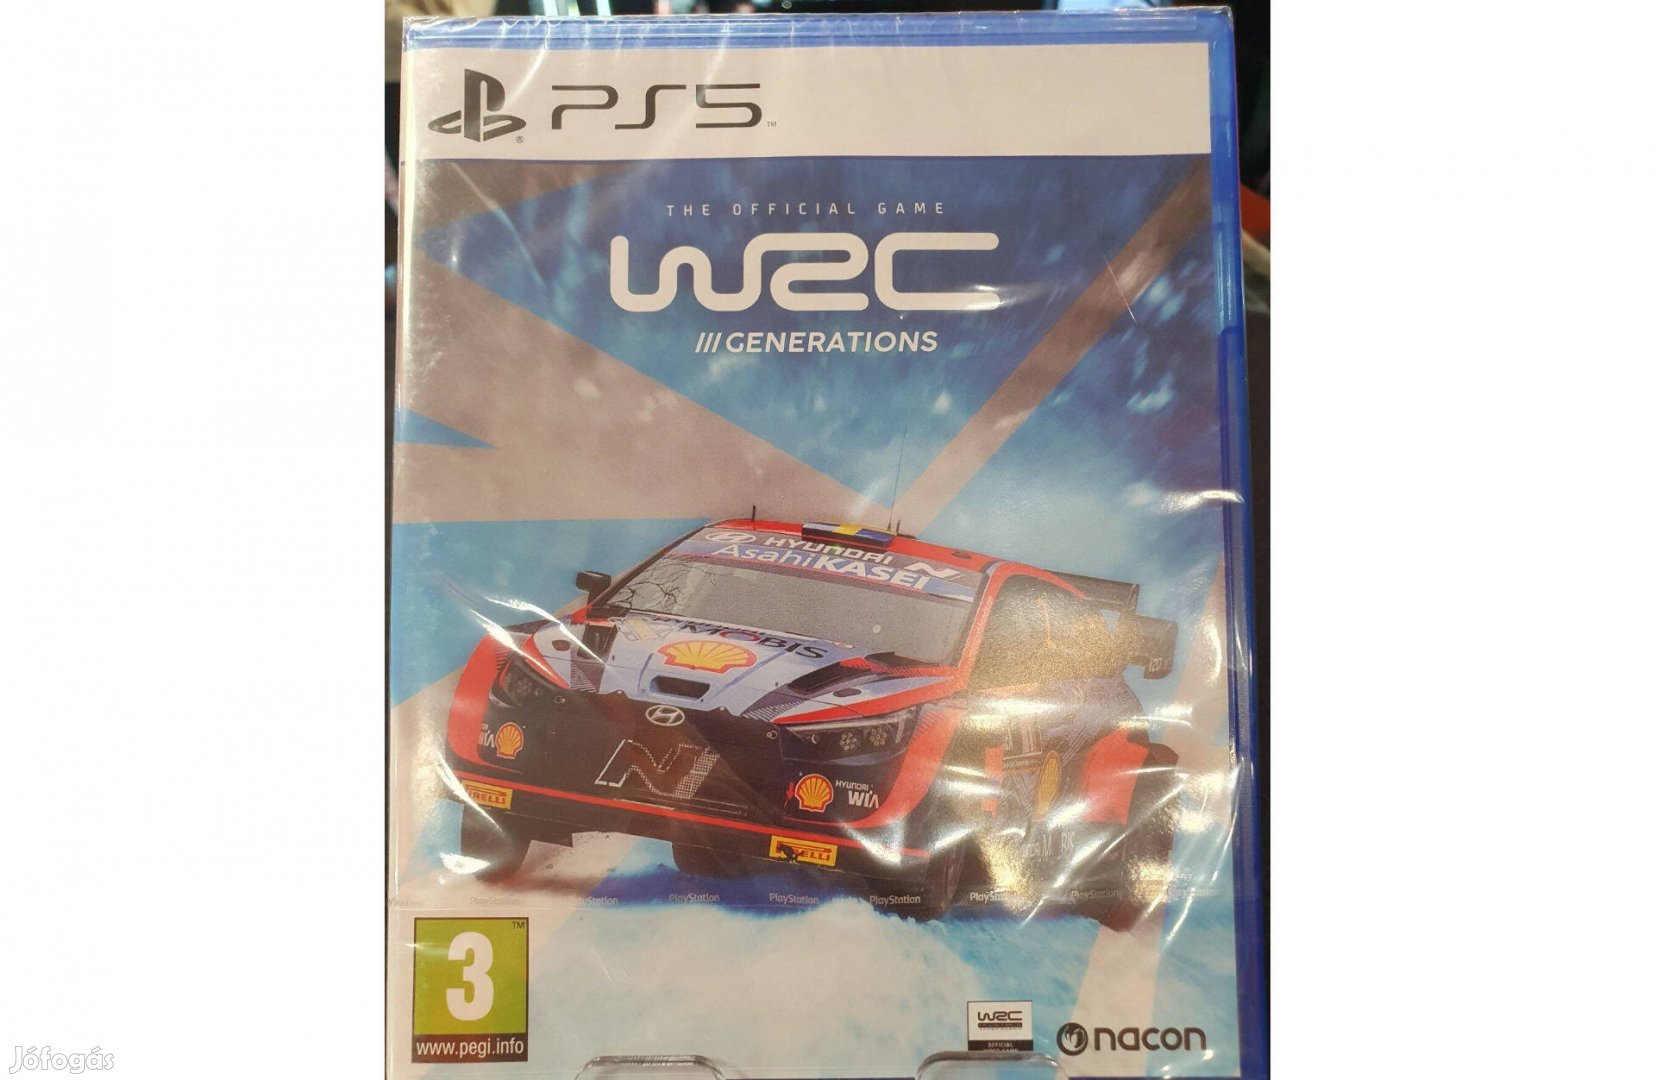 WRC Generations - PS5 | Used Products Budapest Blaha